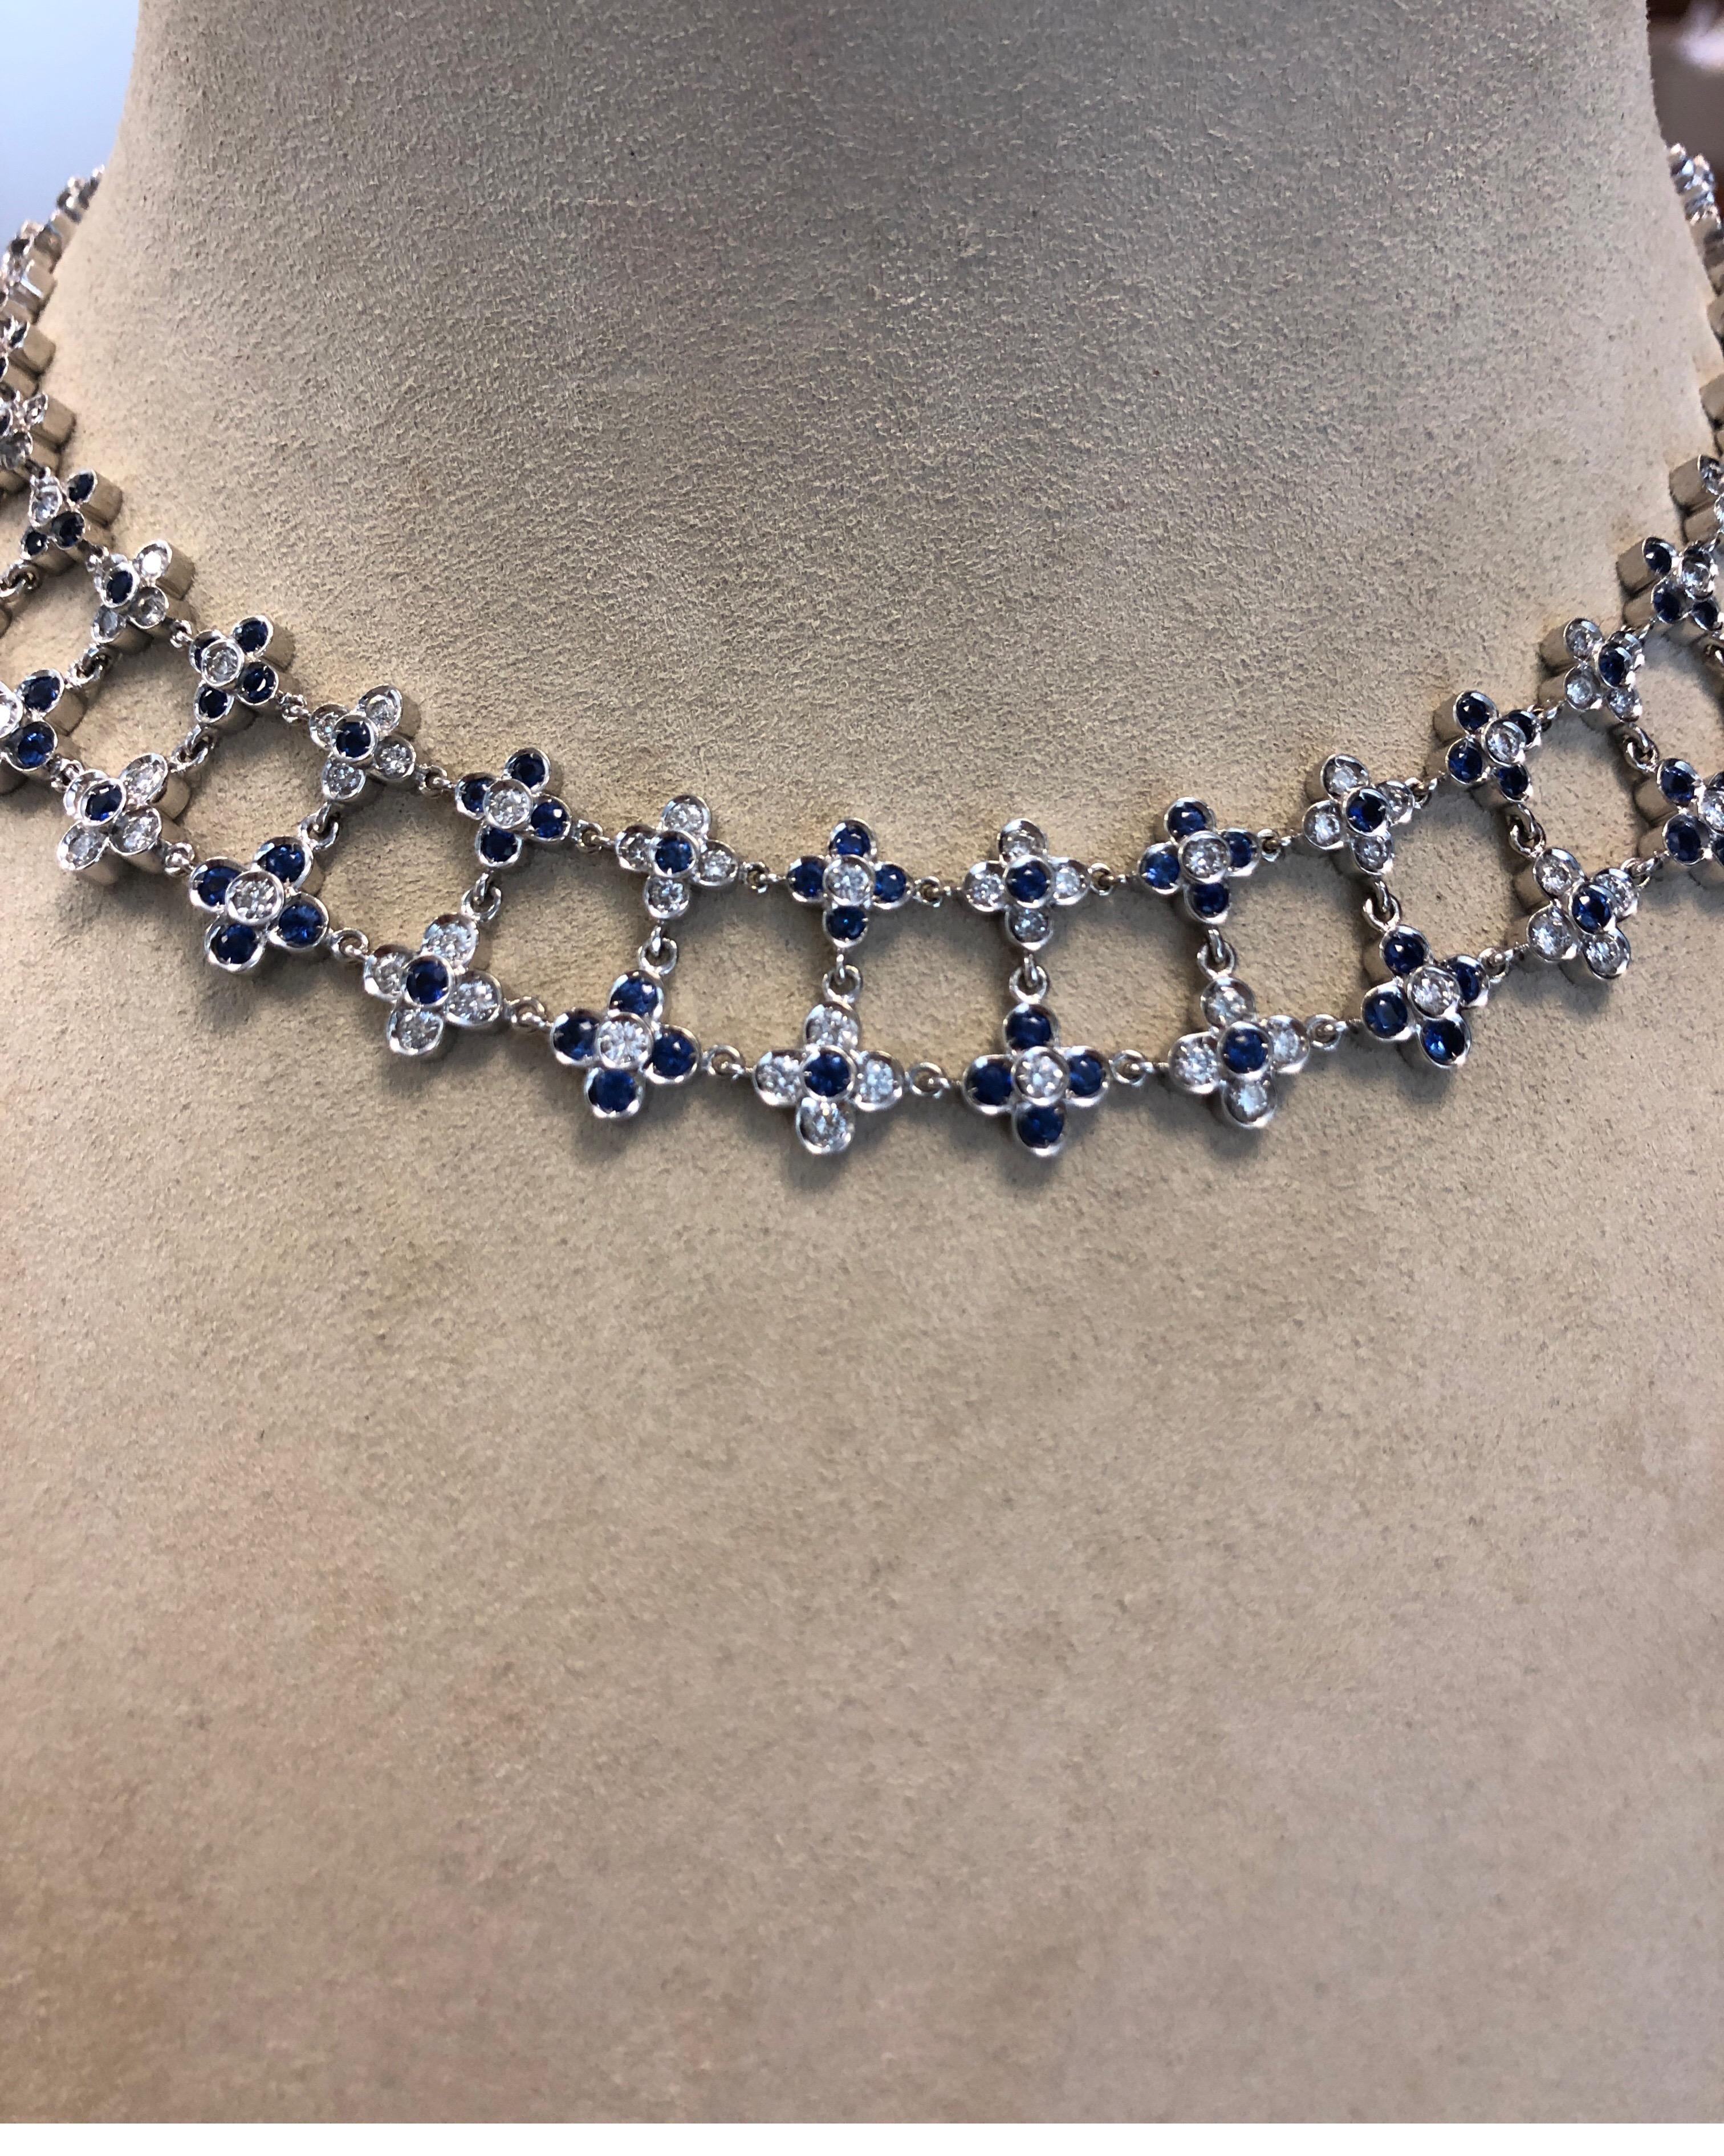 18K white gold two row necklace, with flower motif, bezel set with full cut round diamonds weighing 6.57cts and faceted blue sapphires weighing 9.41cts, length 16 inches and width .75 inches.
Last retail $21,500